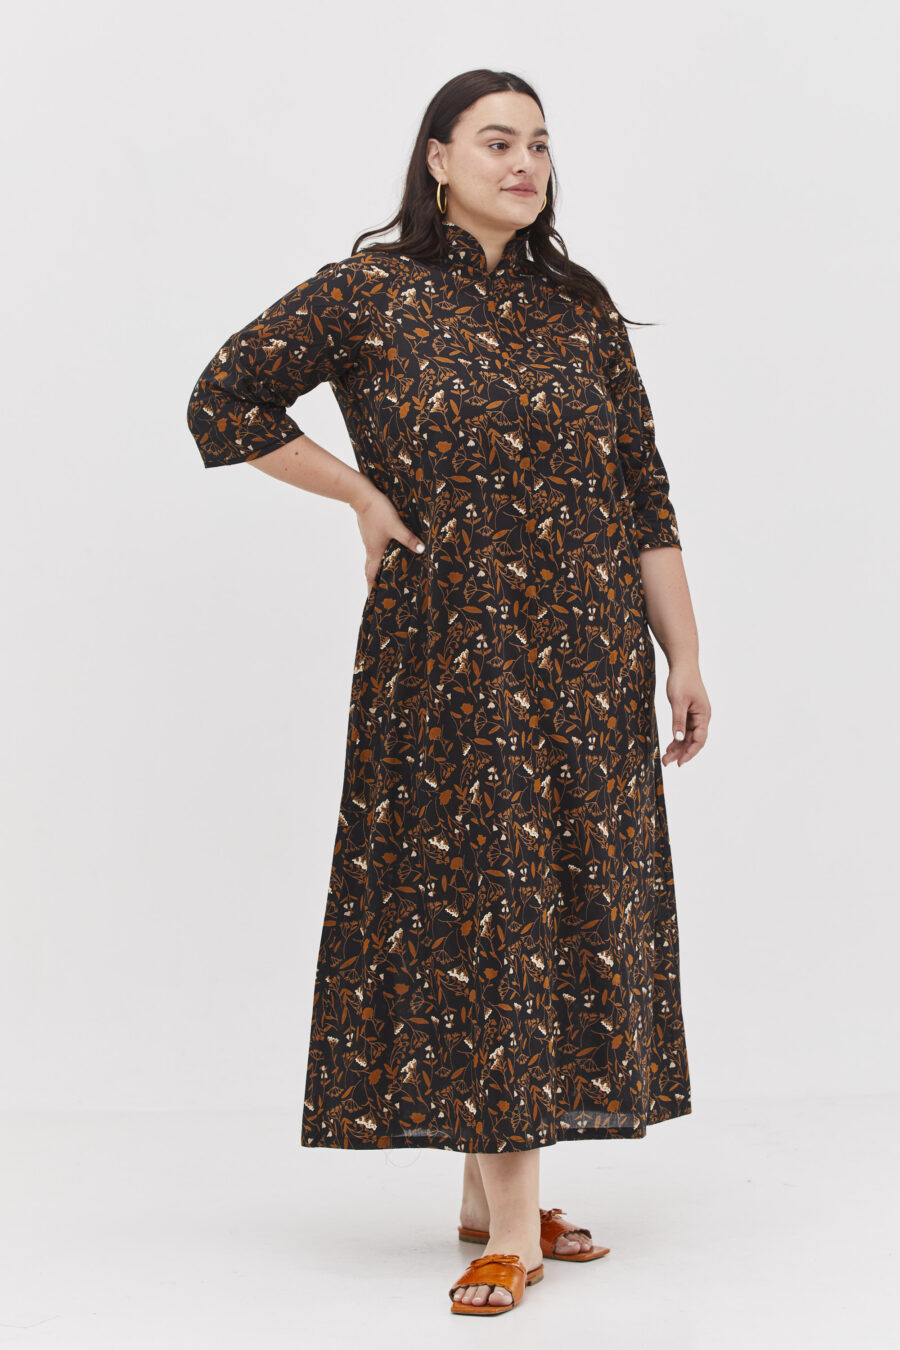 Maiko dress | Japanese dress with a unique high collar – Waltz print, very dark blue dress with light brown leafs and white flowers print.